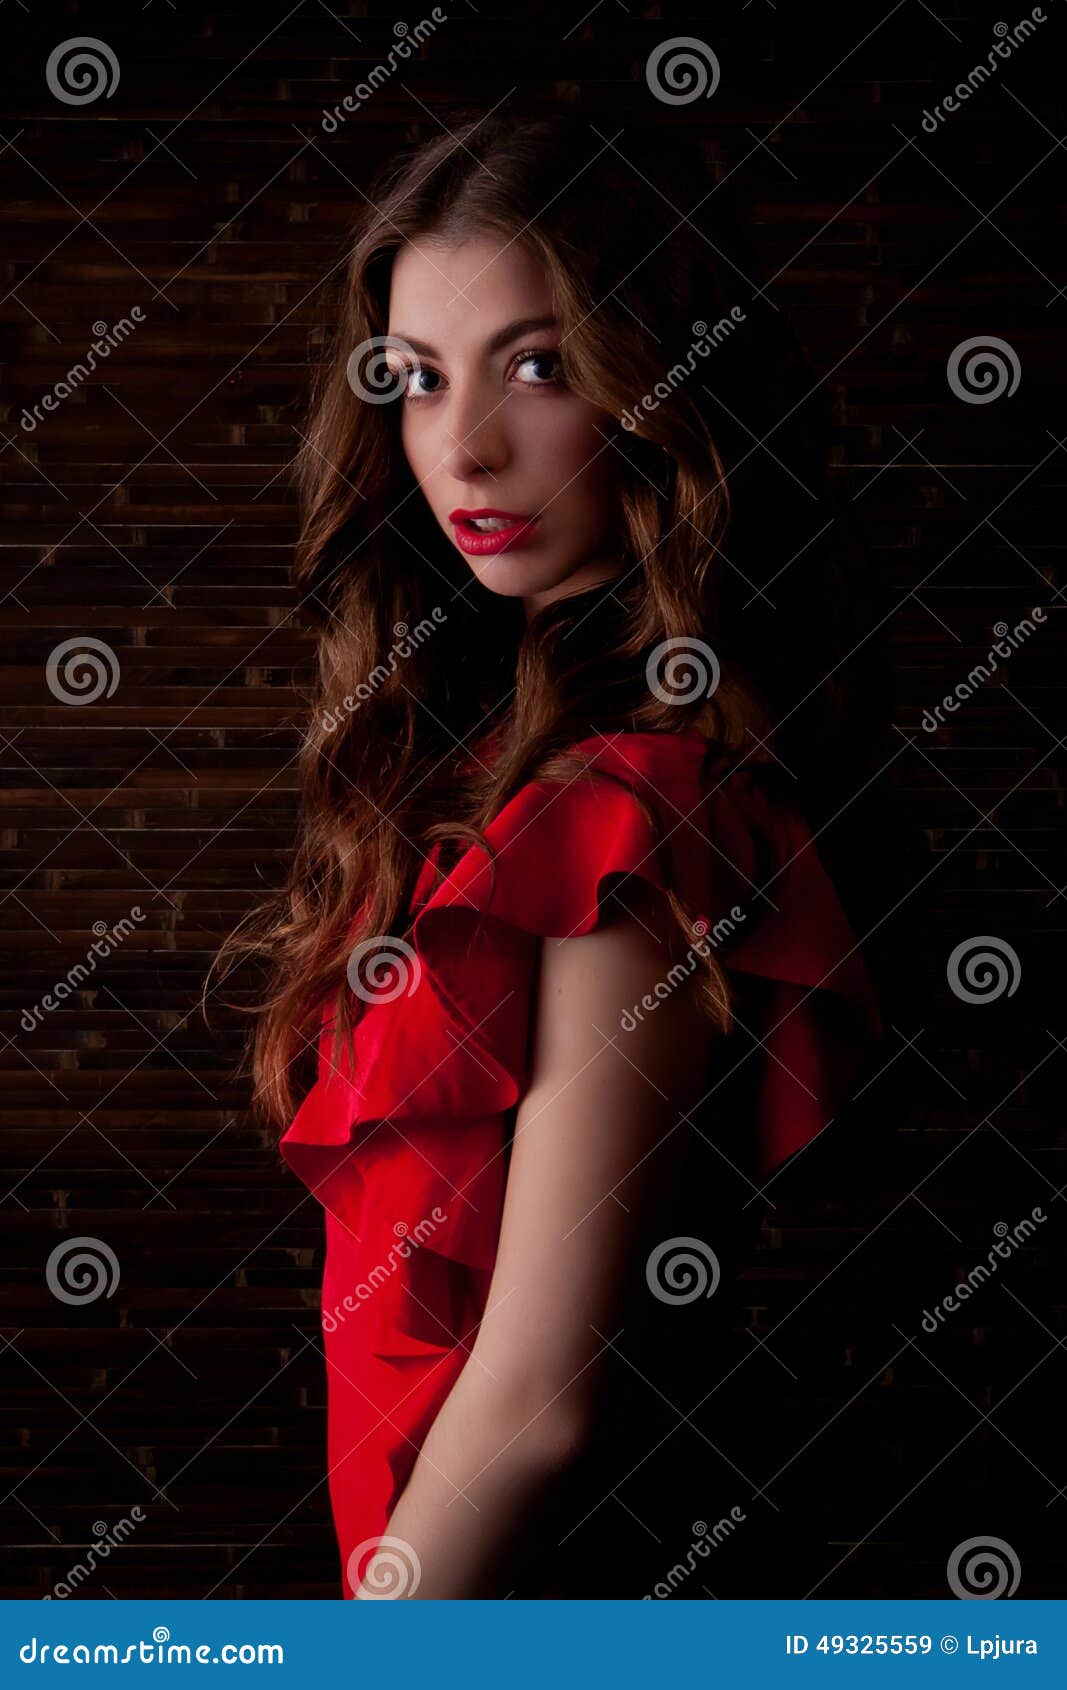 Girl in red dress stock image. Image of sensual, young - 49325559